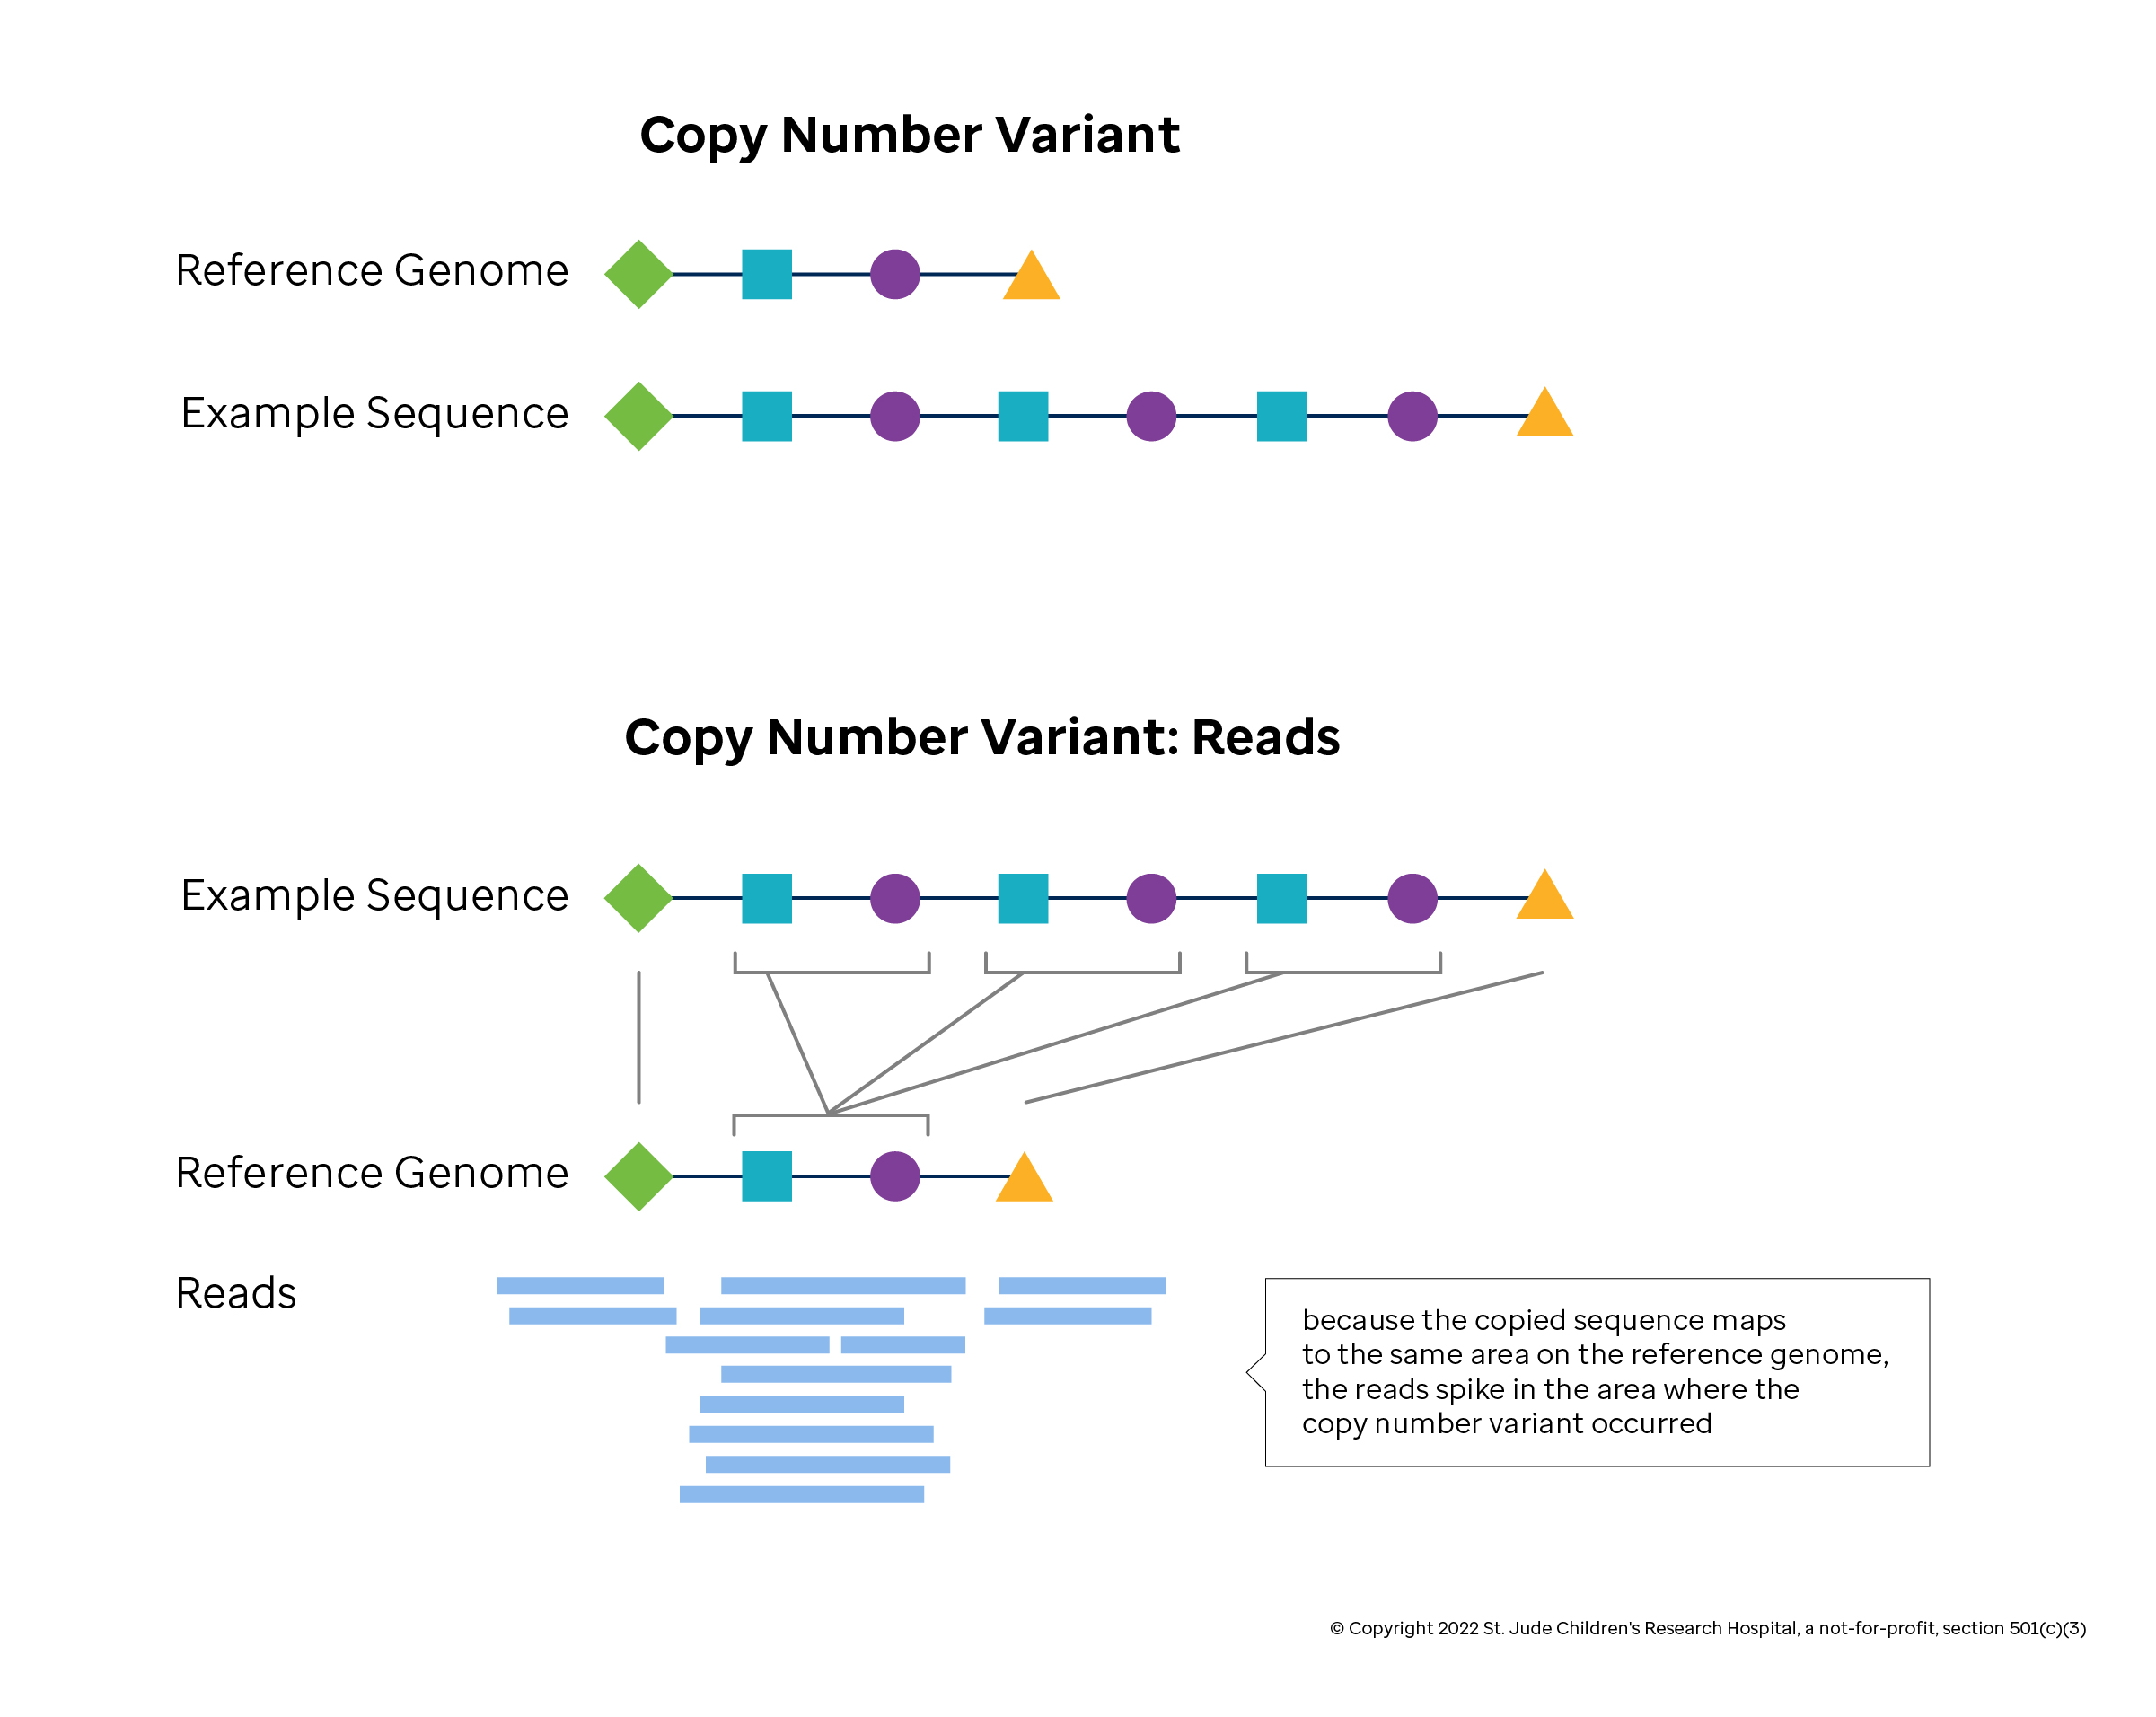 Image depicting copy number variation and its effect on read mapping.